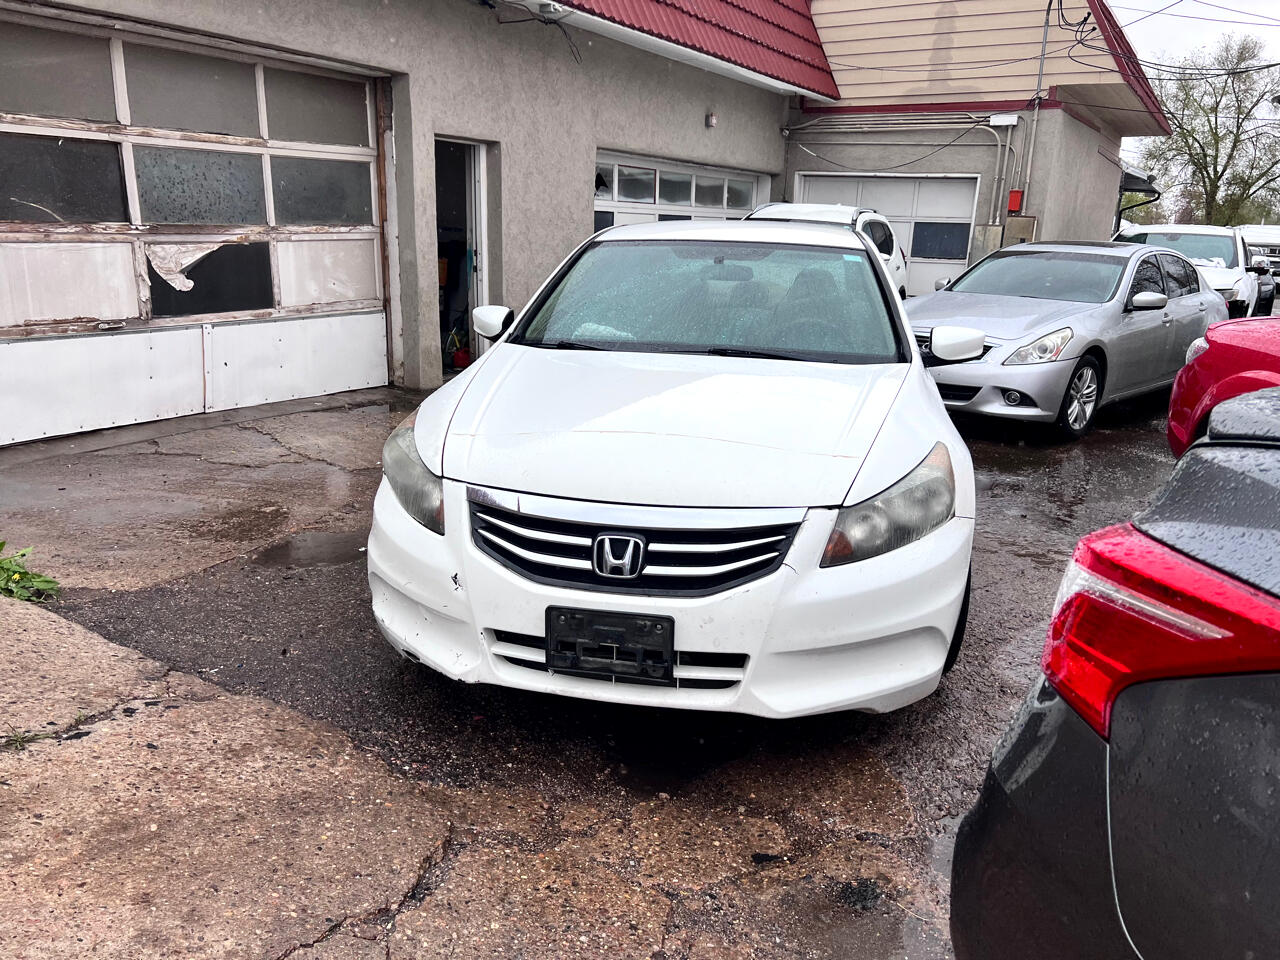 Used 2012 Honda Accord SE with VIN 1HGCP2F63CA085870 for sale in Denver, CO